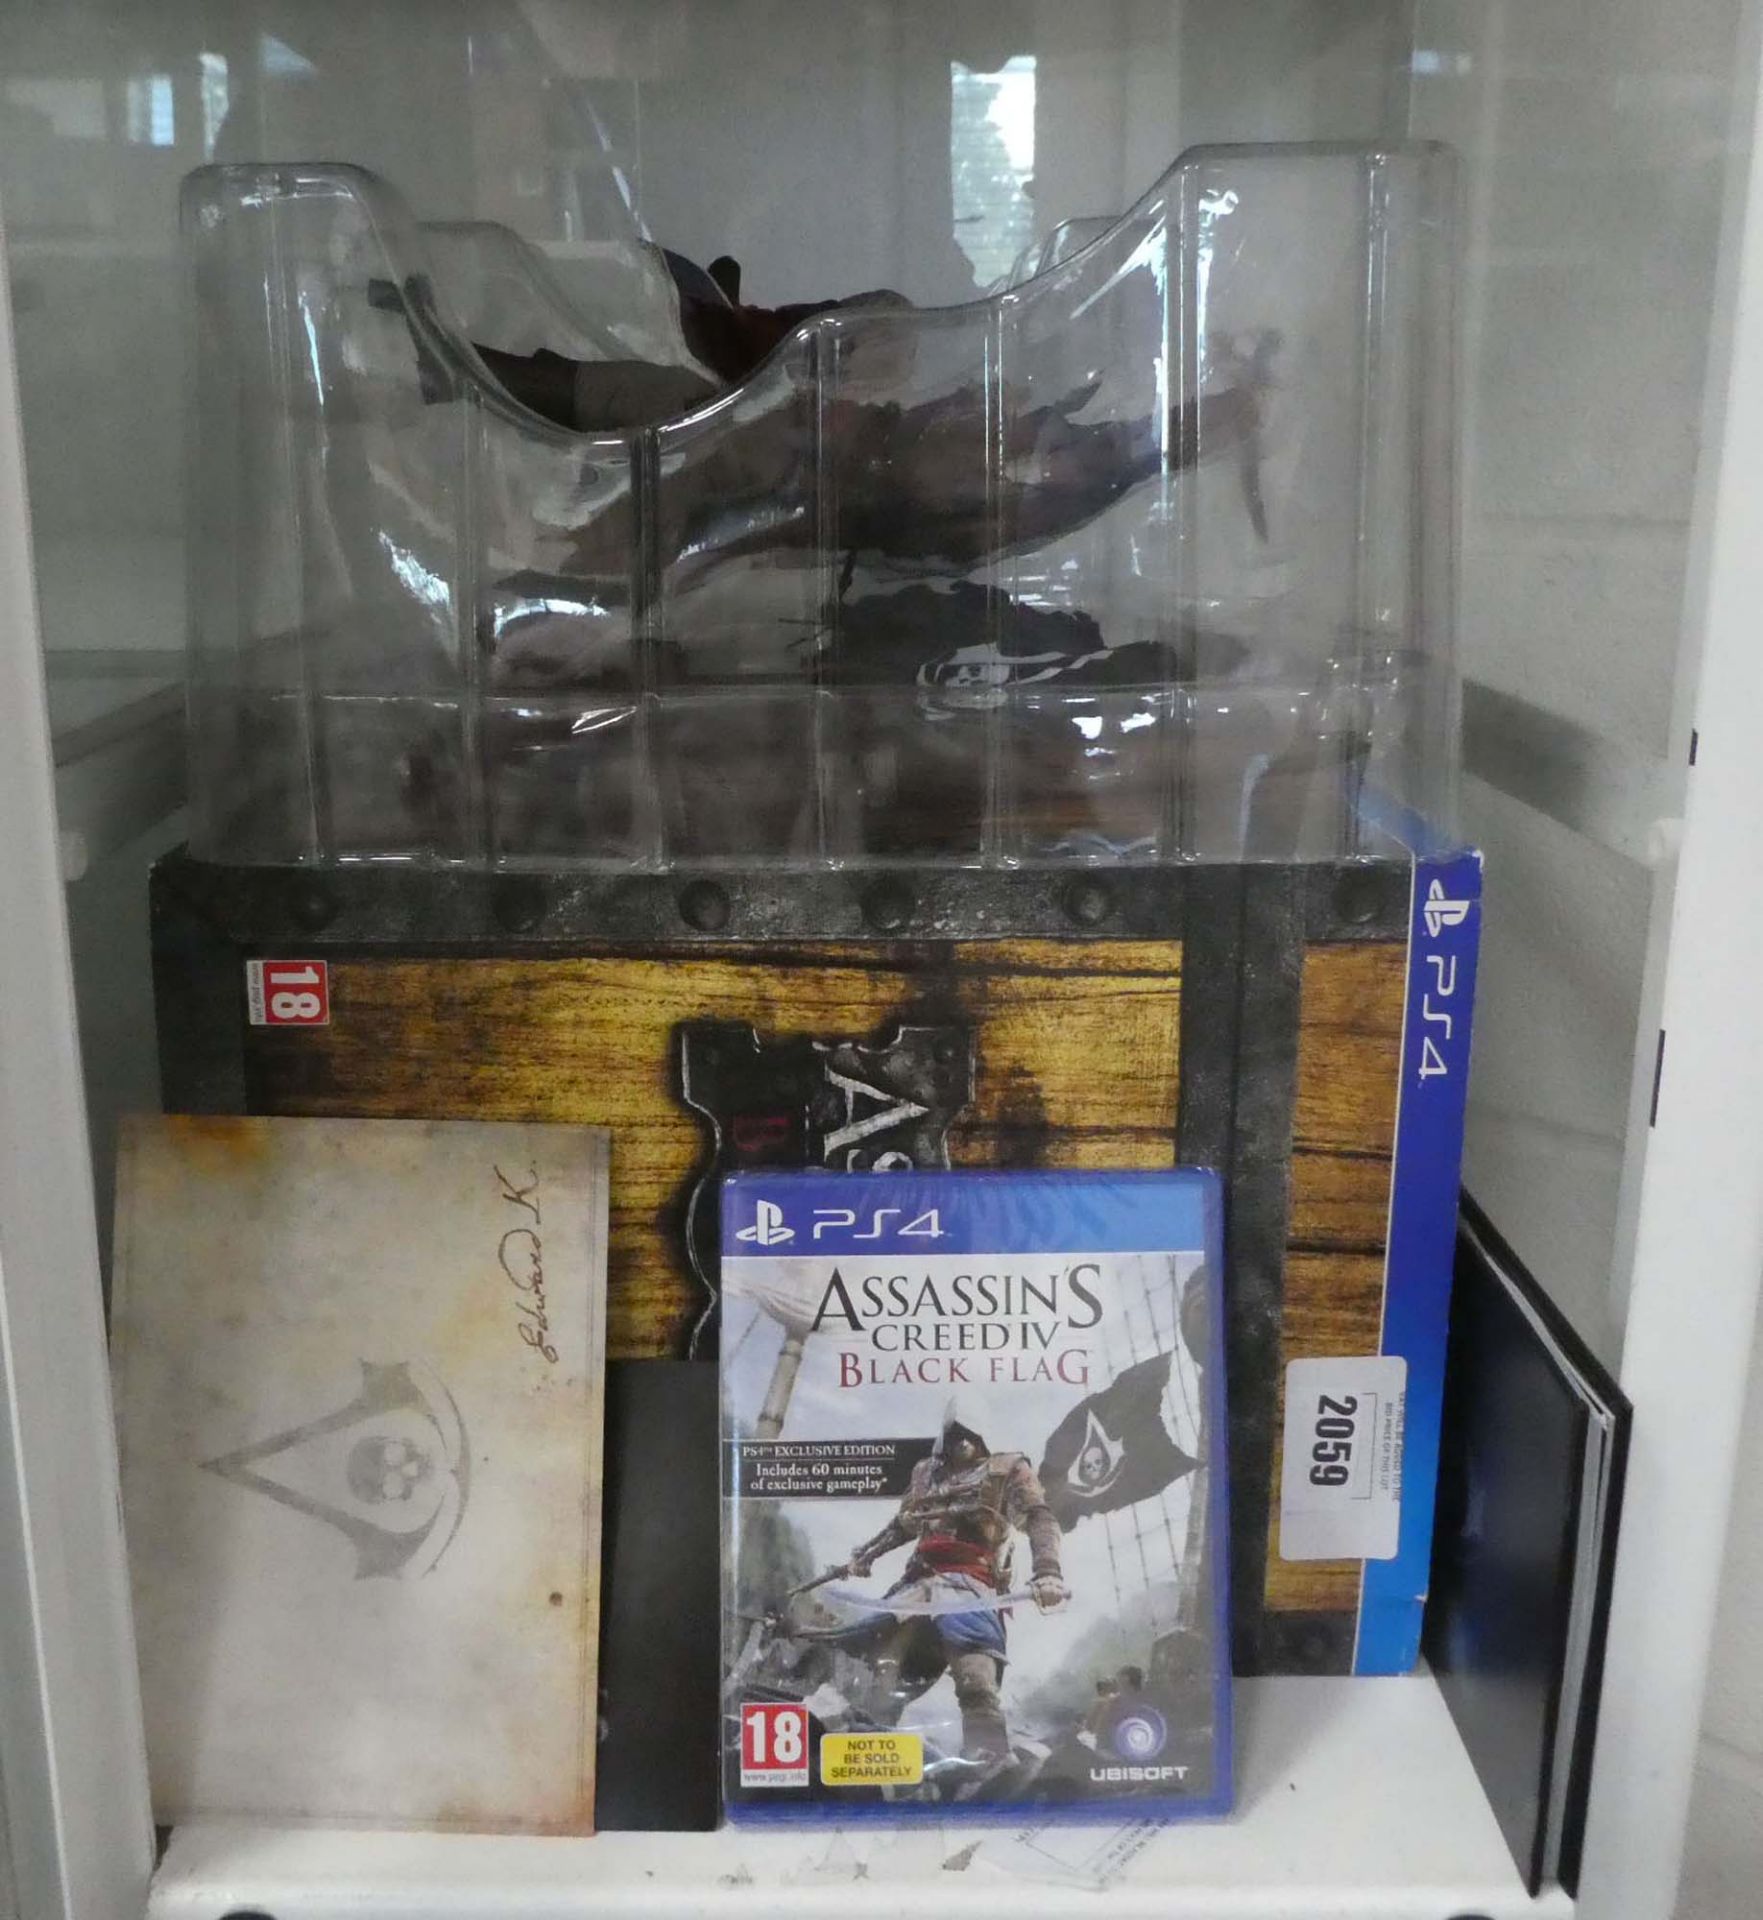 PS4 Assassins Creed Black Flag Limited Edition collectors set with figures, steel book copy of the